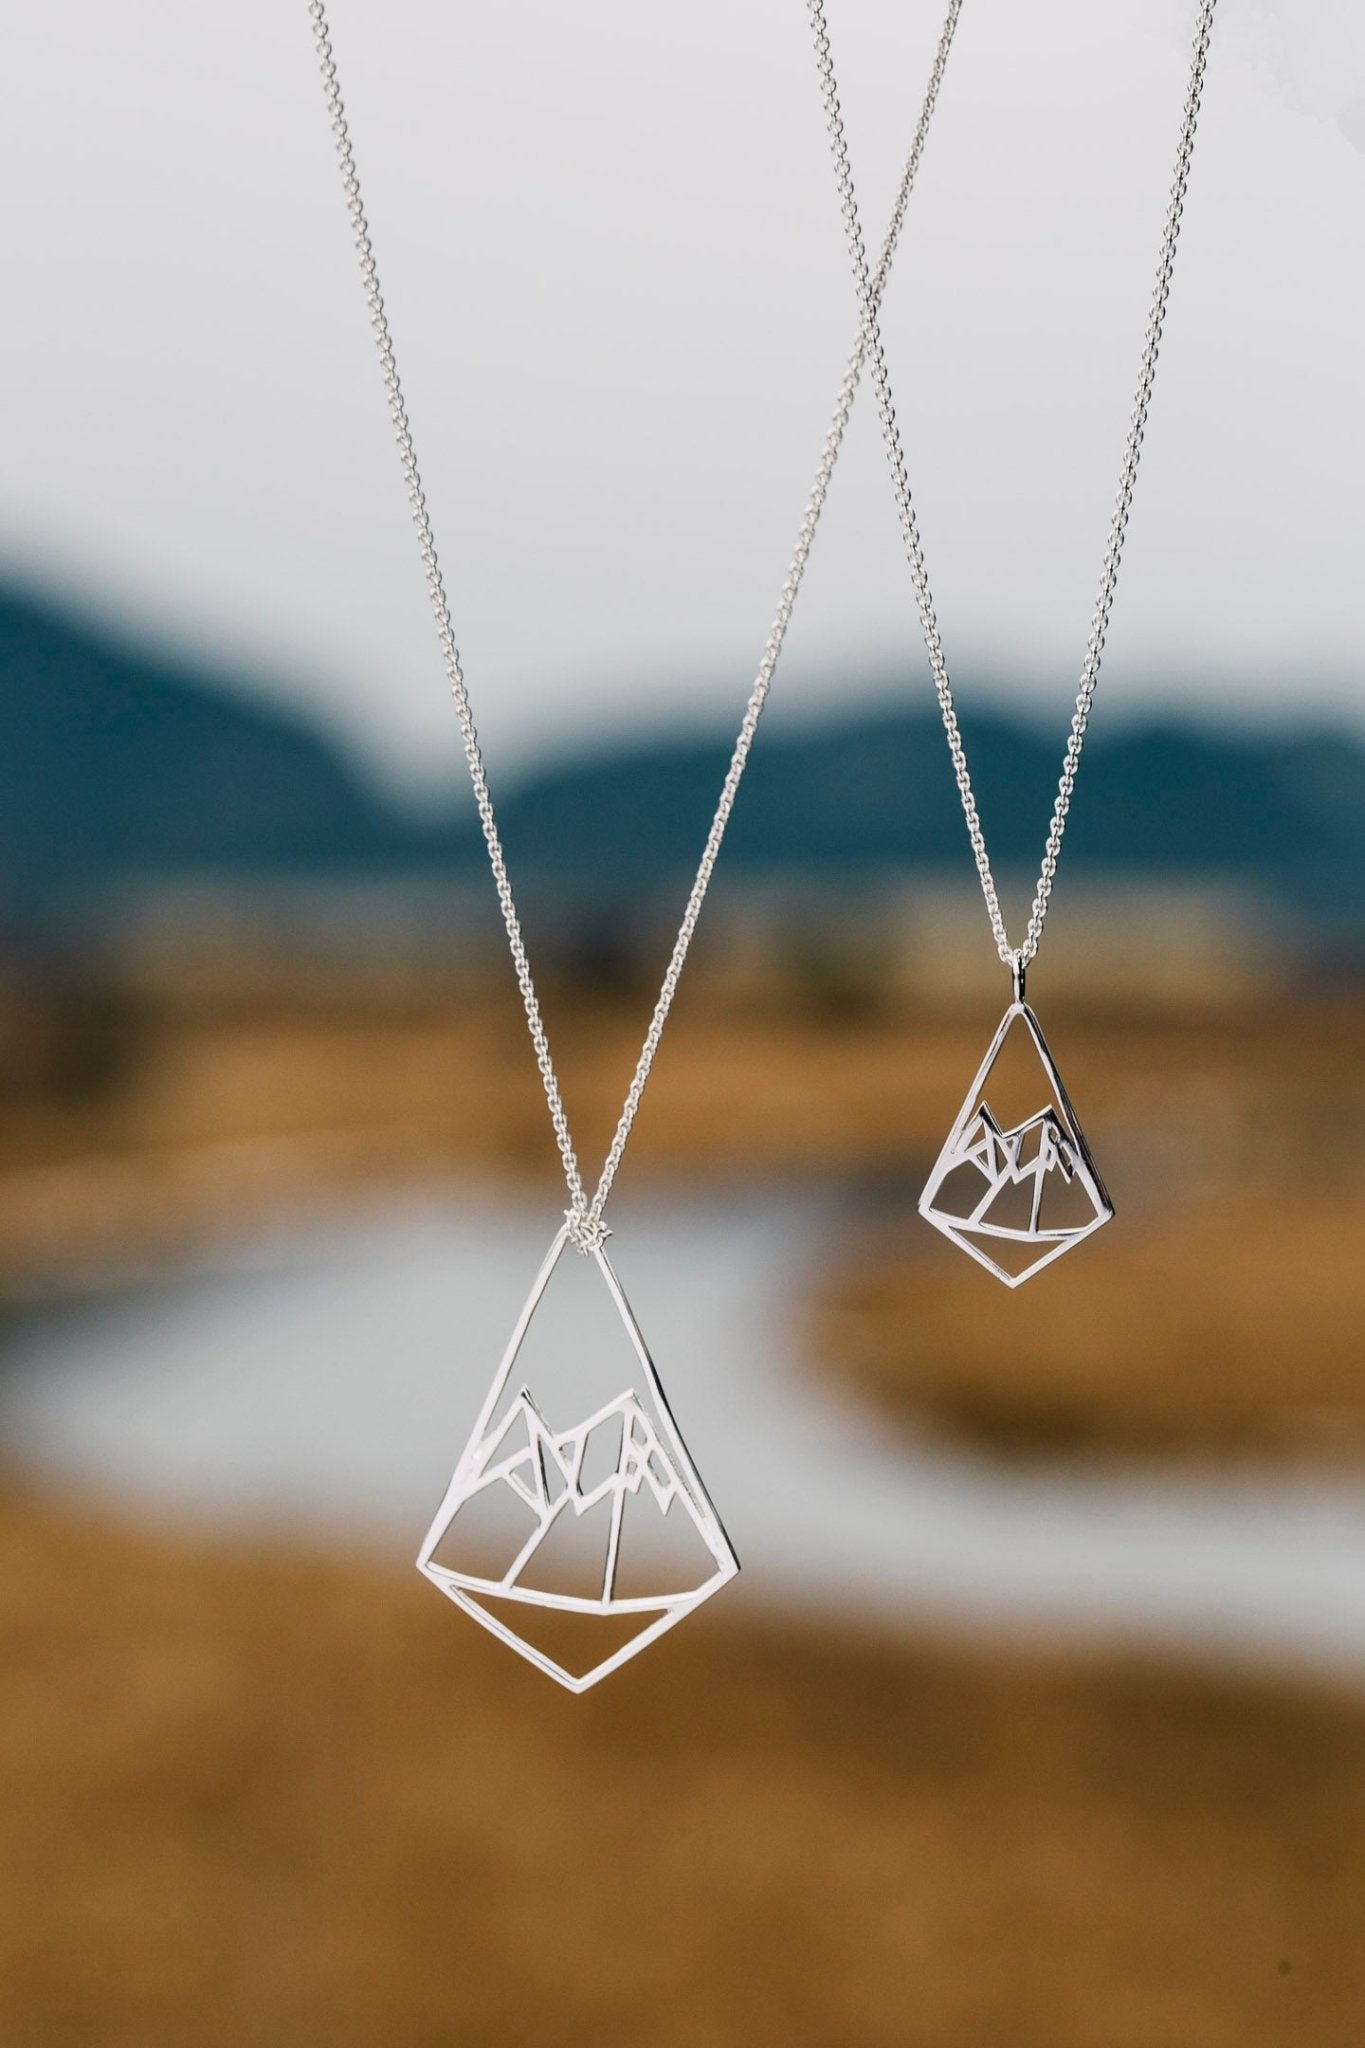 different size diamond shaped pendants on different length necklace chains with river and mountain background